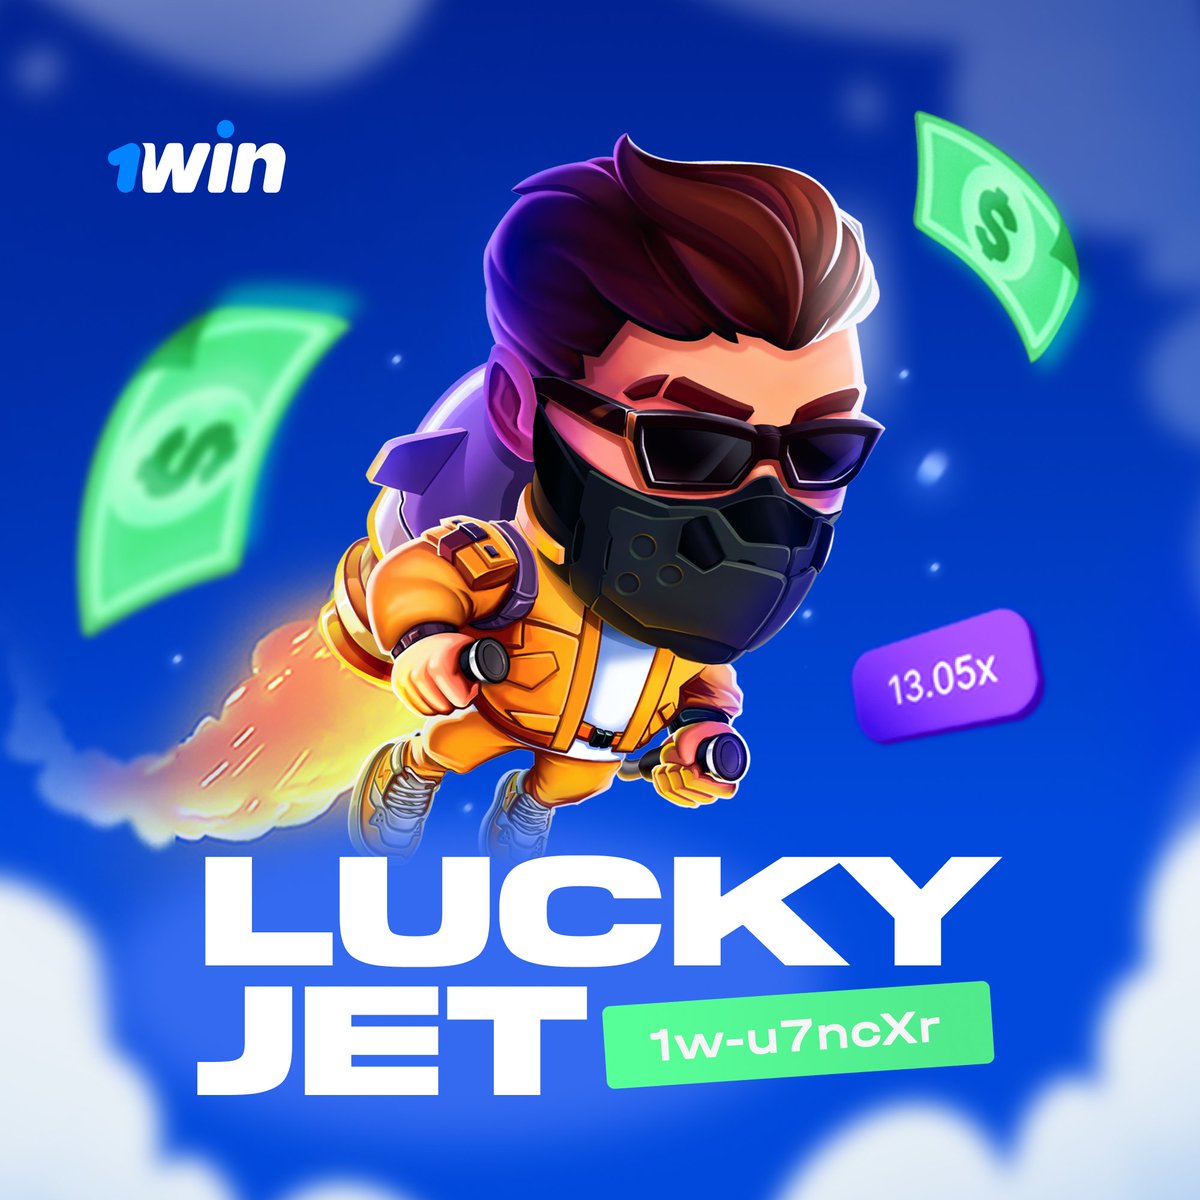 🎰Lucky Jet #giveaway! 💰Go to the official 1win website, put your code in and WIN 💸There is a limited number of activations! 📣Change your currency to USD ($) or bonus will not be credited! 🔗cutt.ly/4w96goeu | #1win | #casino | #giveaways | #LuckyJet